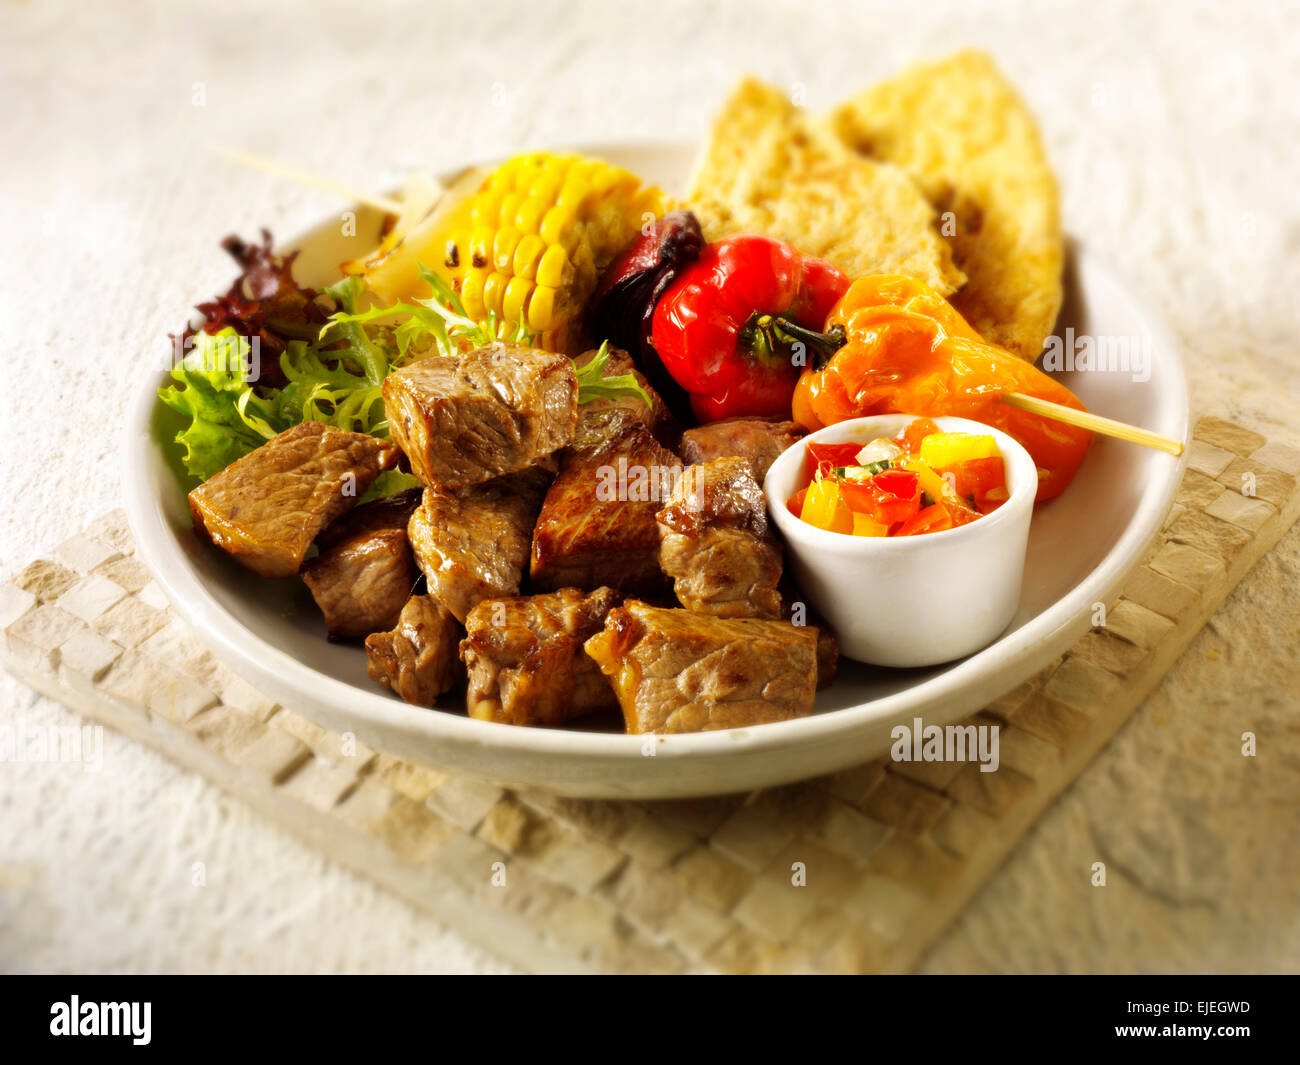 Barbecue beef steak brochettes and vegetables Stock Photo